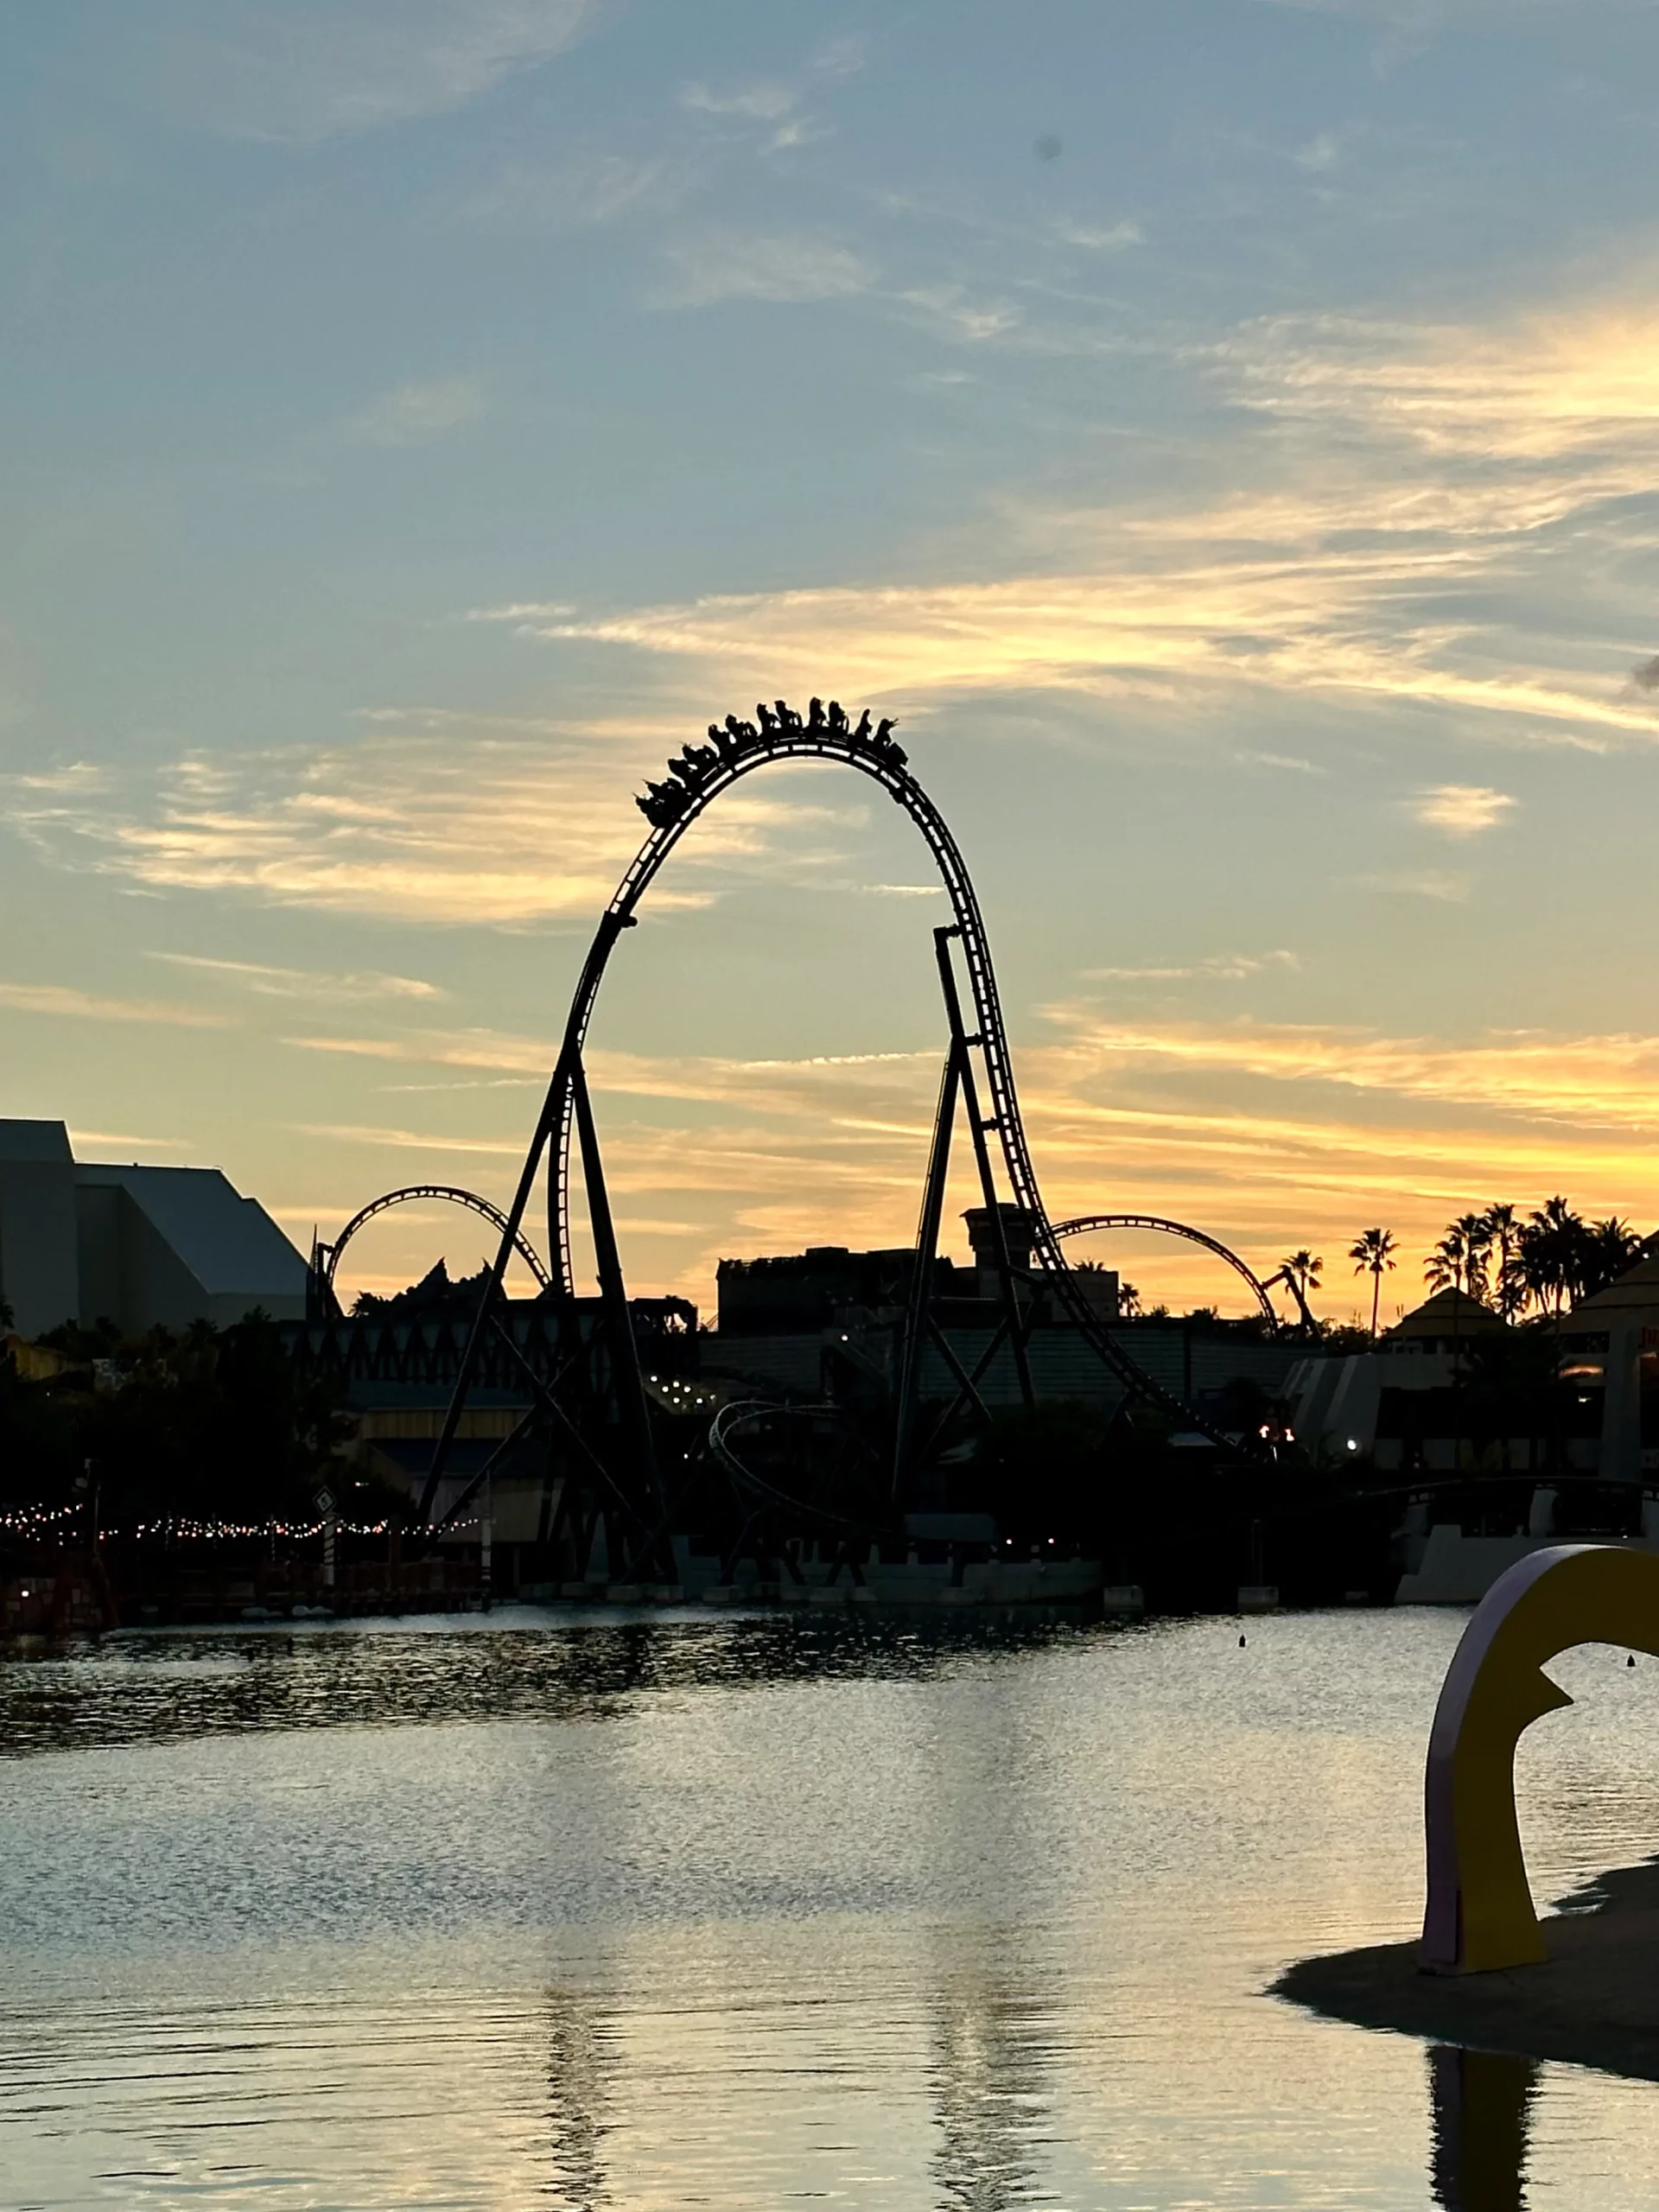 VelociCoaster at Universal Islands of Adventure going over its top hat during sunset